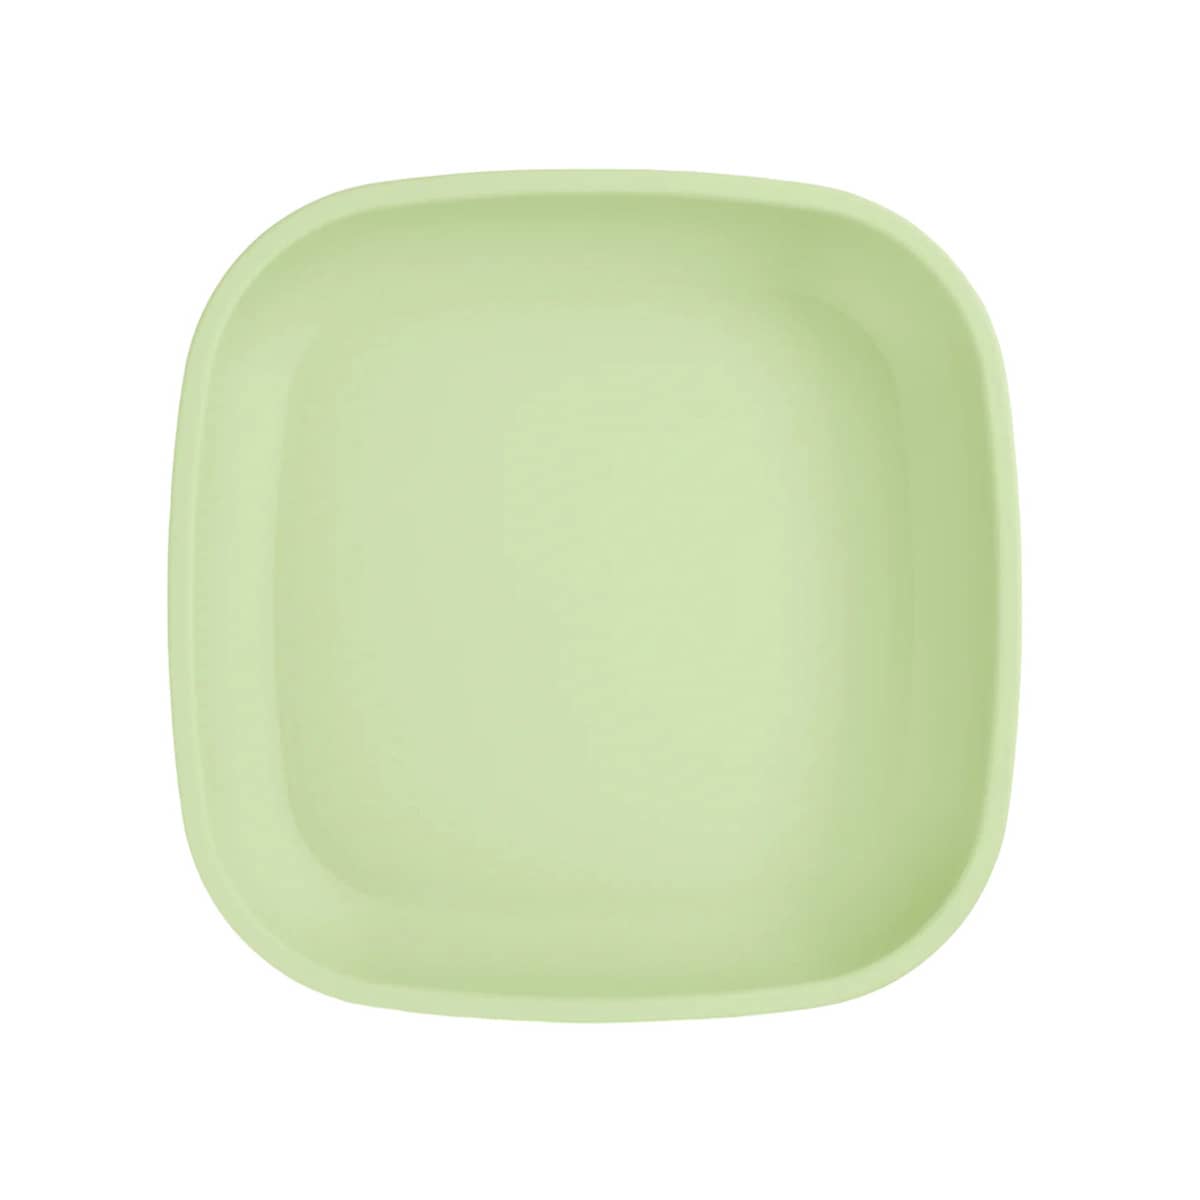 Re-Play Recycled Flat Plate - Leaf Green